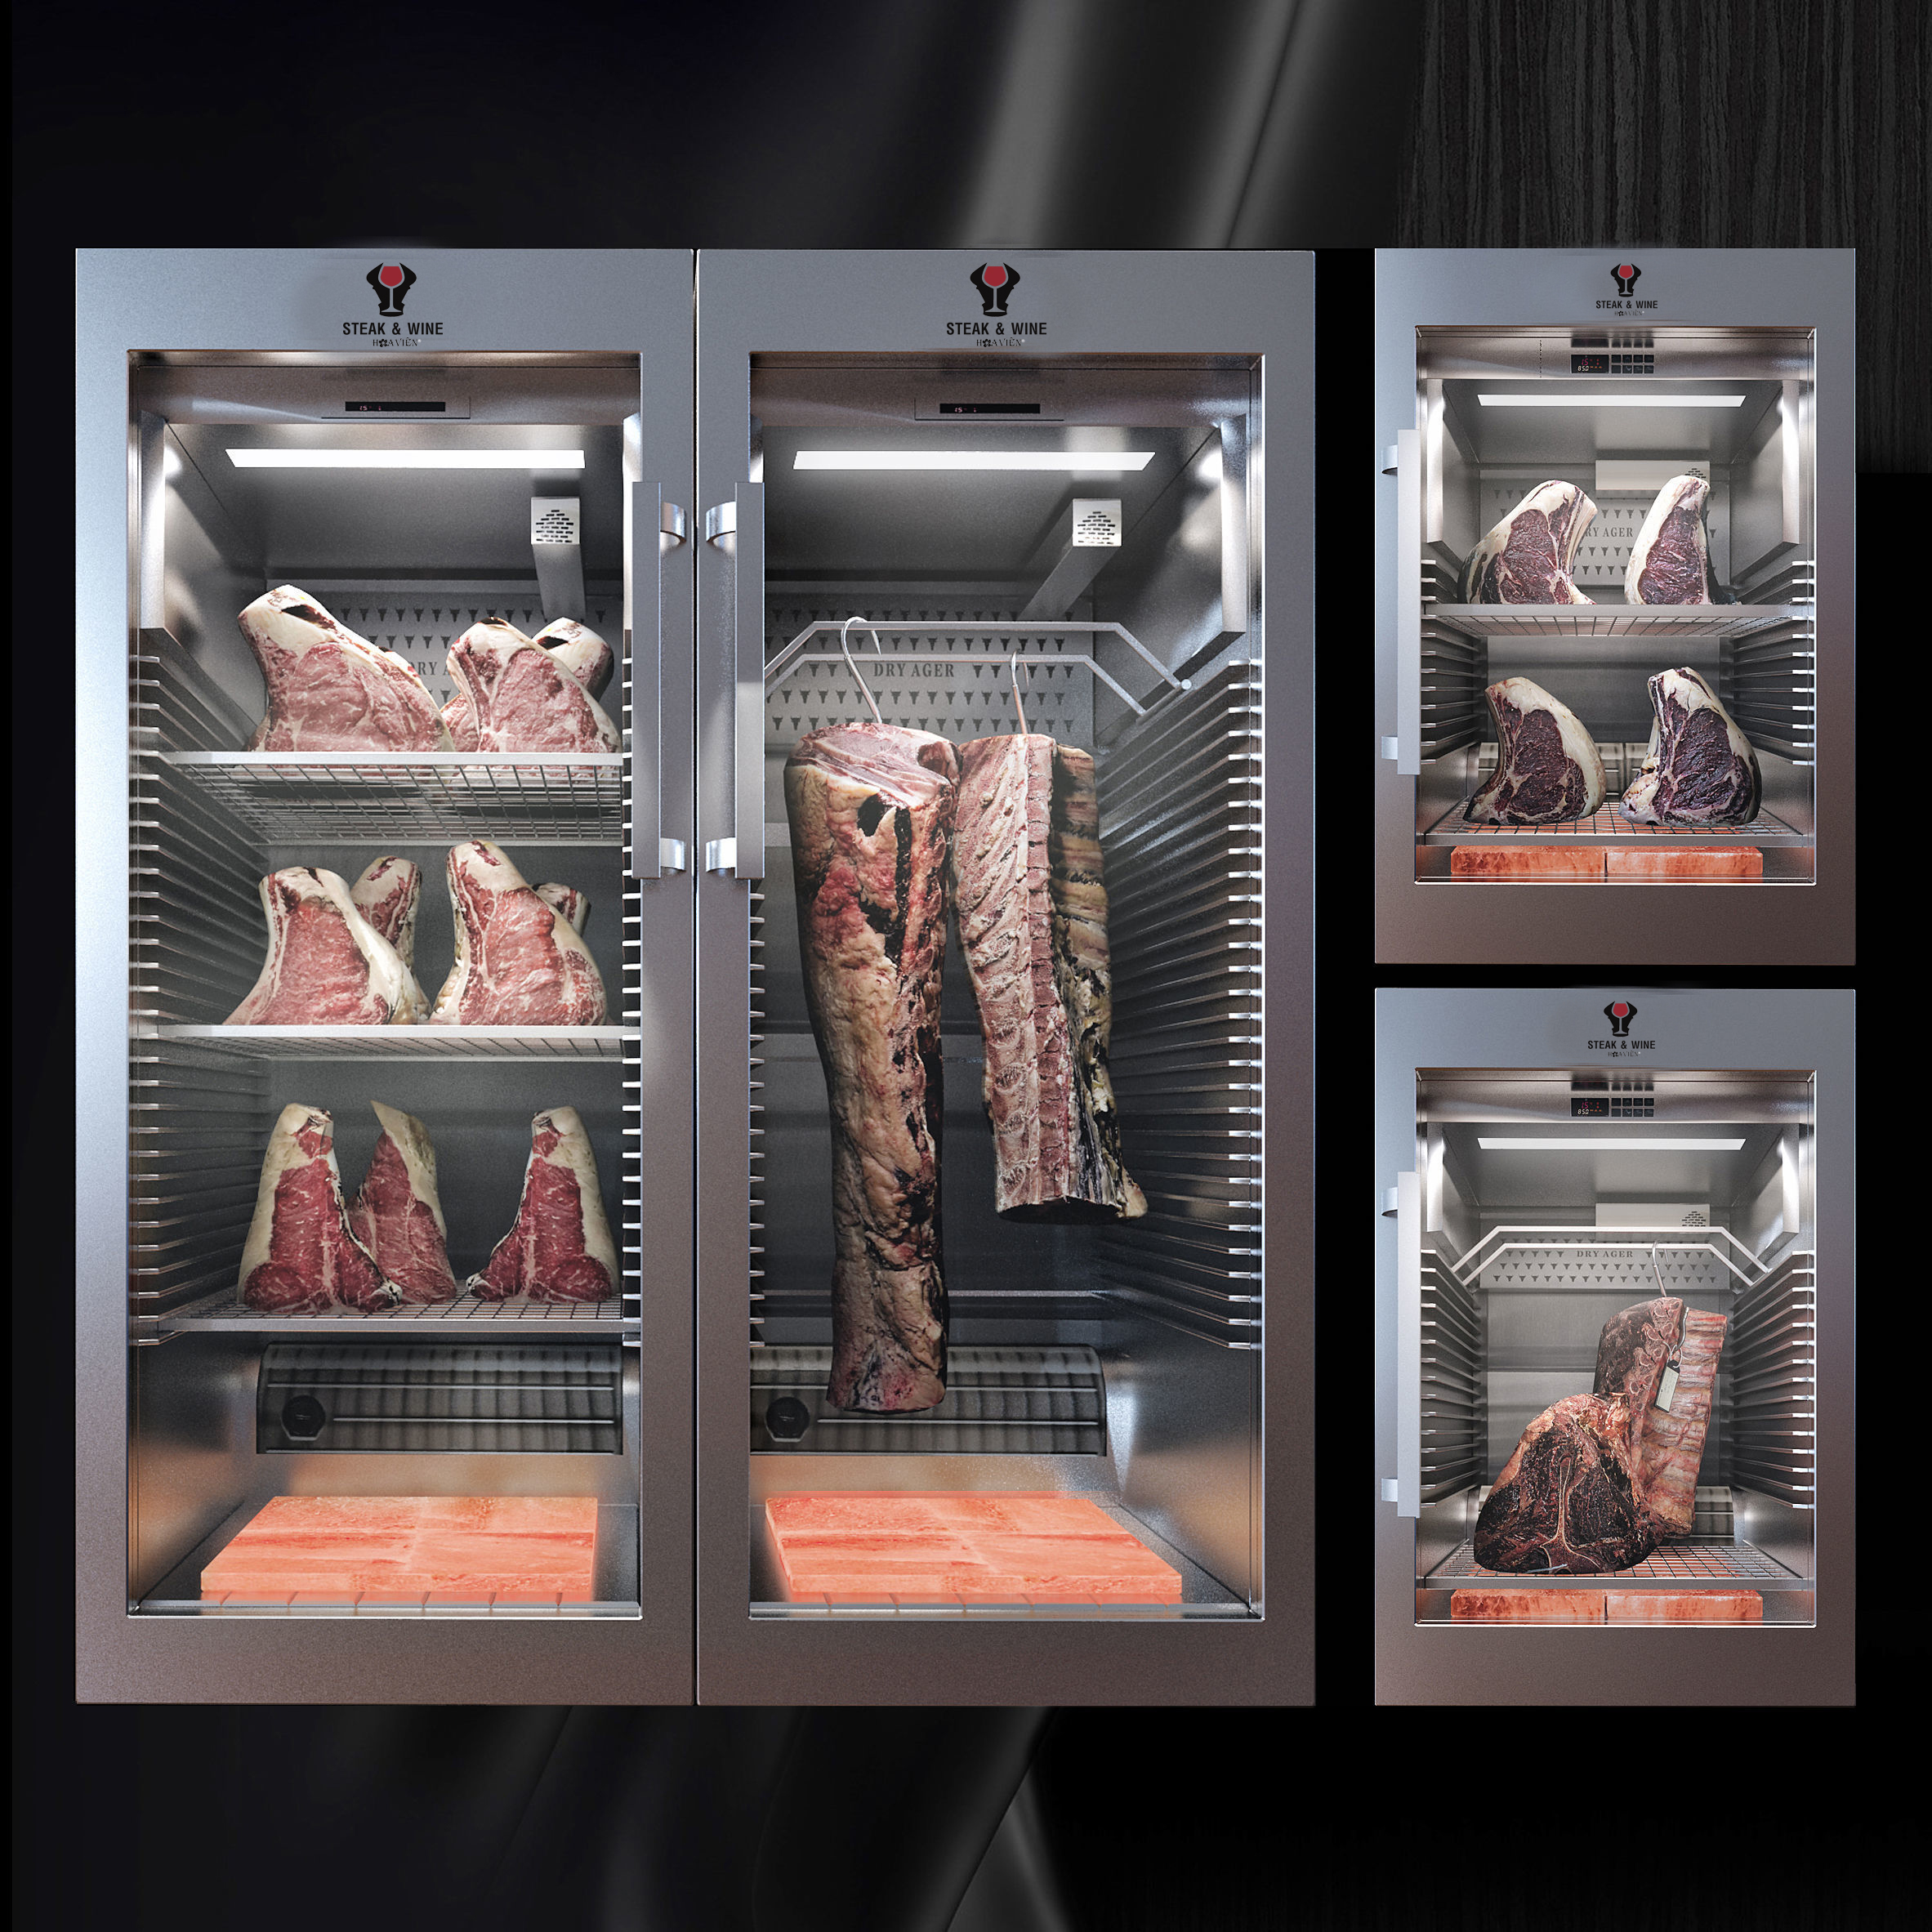 DRY AGING CABINET